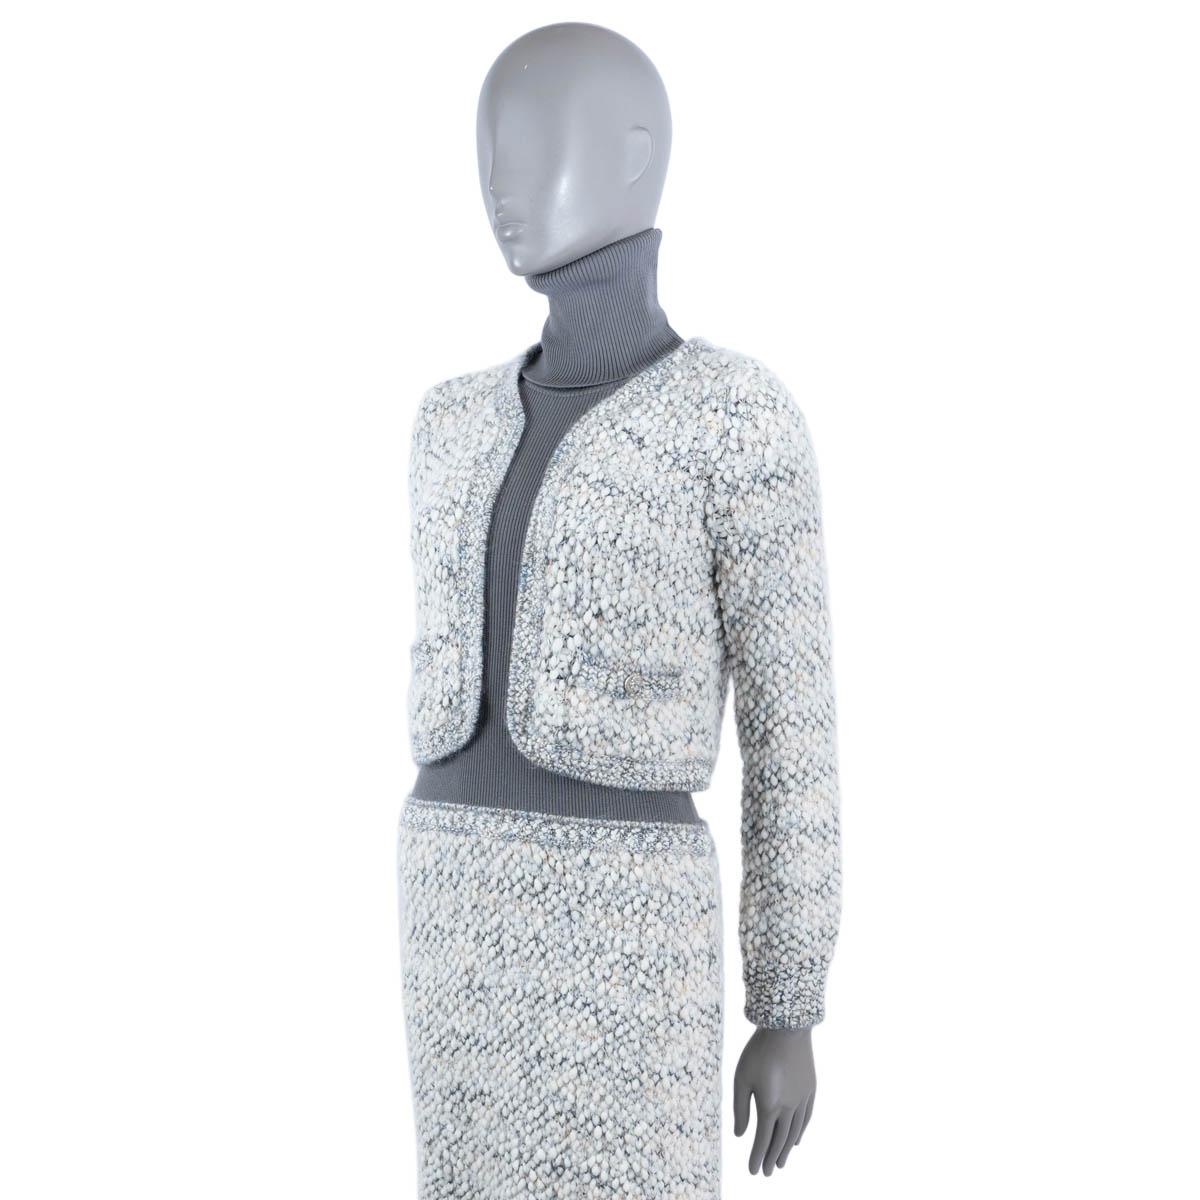 CHANEL silbergraues & weißes 2016 16A ROME LAYERED BOUCLE Kleid 38 S im Angebot 1